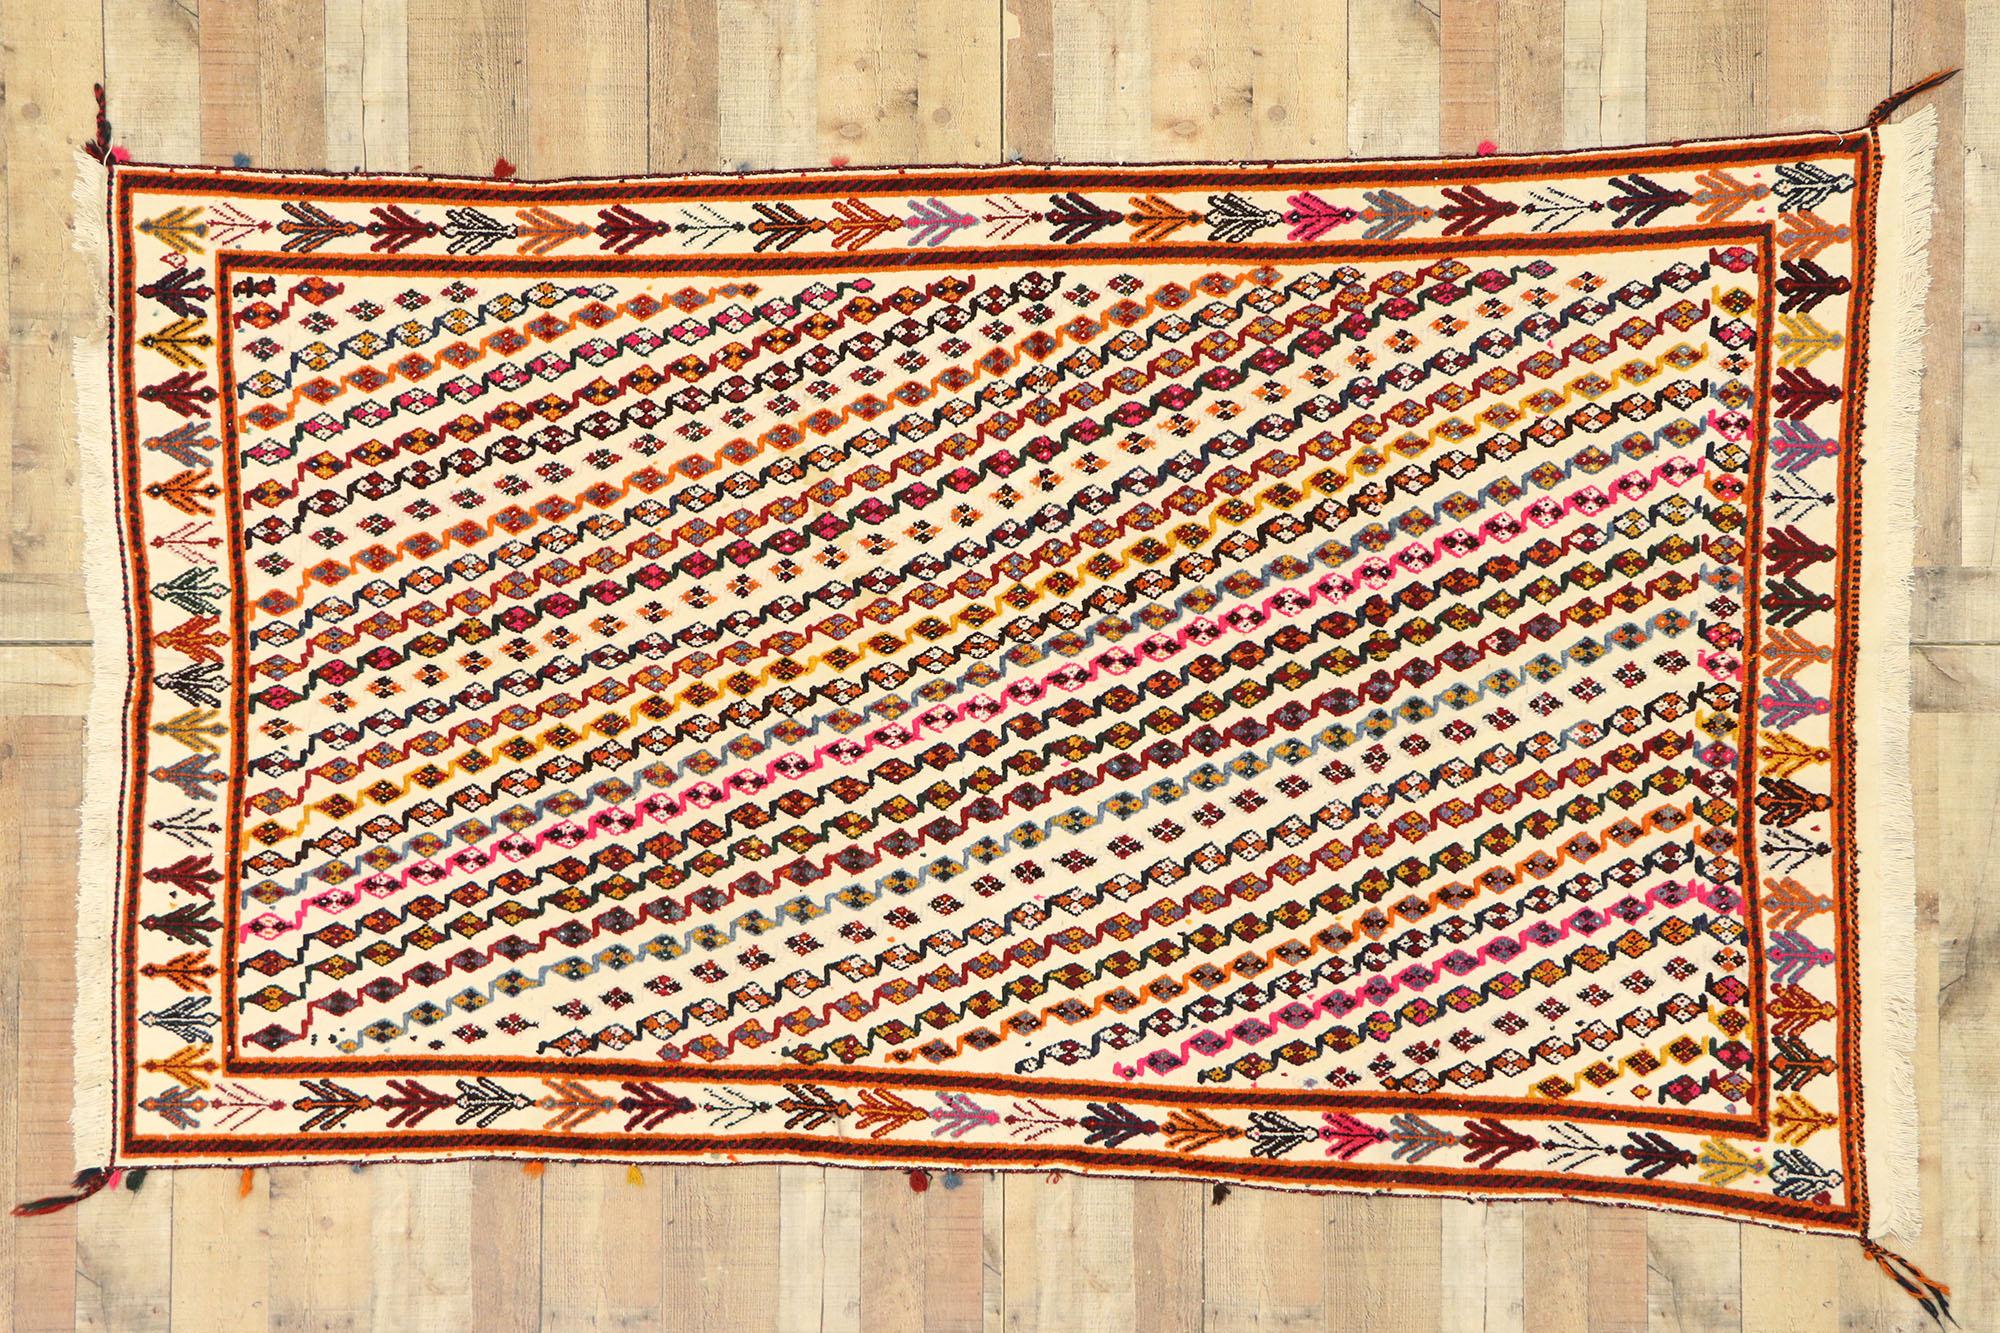 Vintage Moroccan Souf Kilim Rug with Boho Chic Tribal Style, High-Low Rug For Sale 1